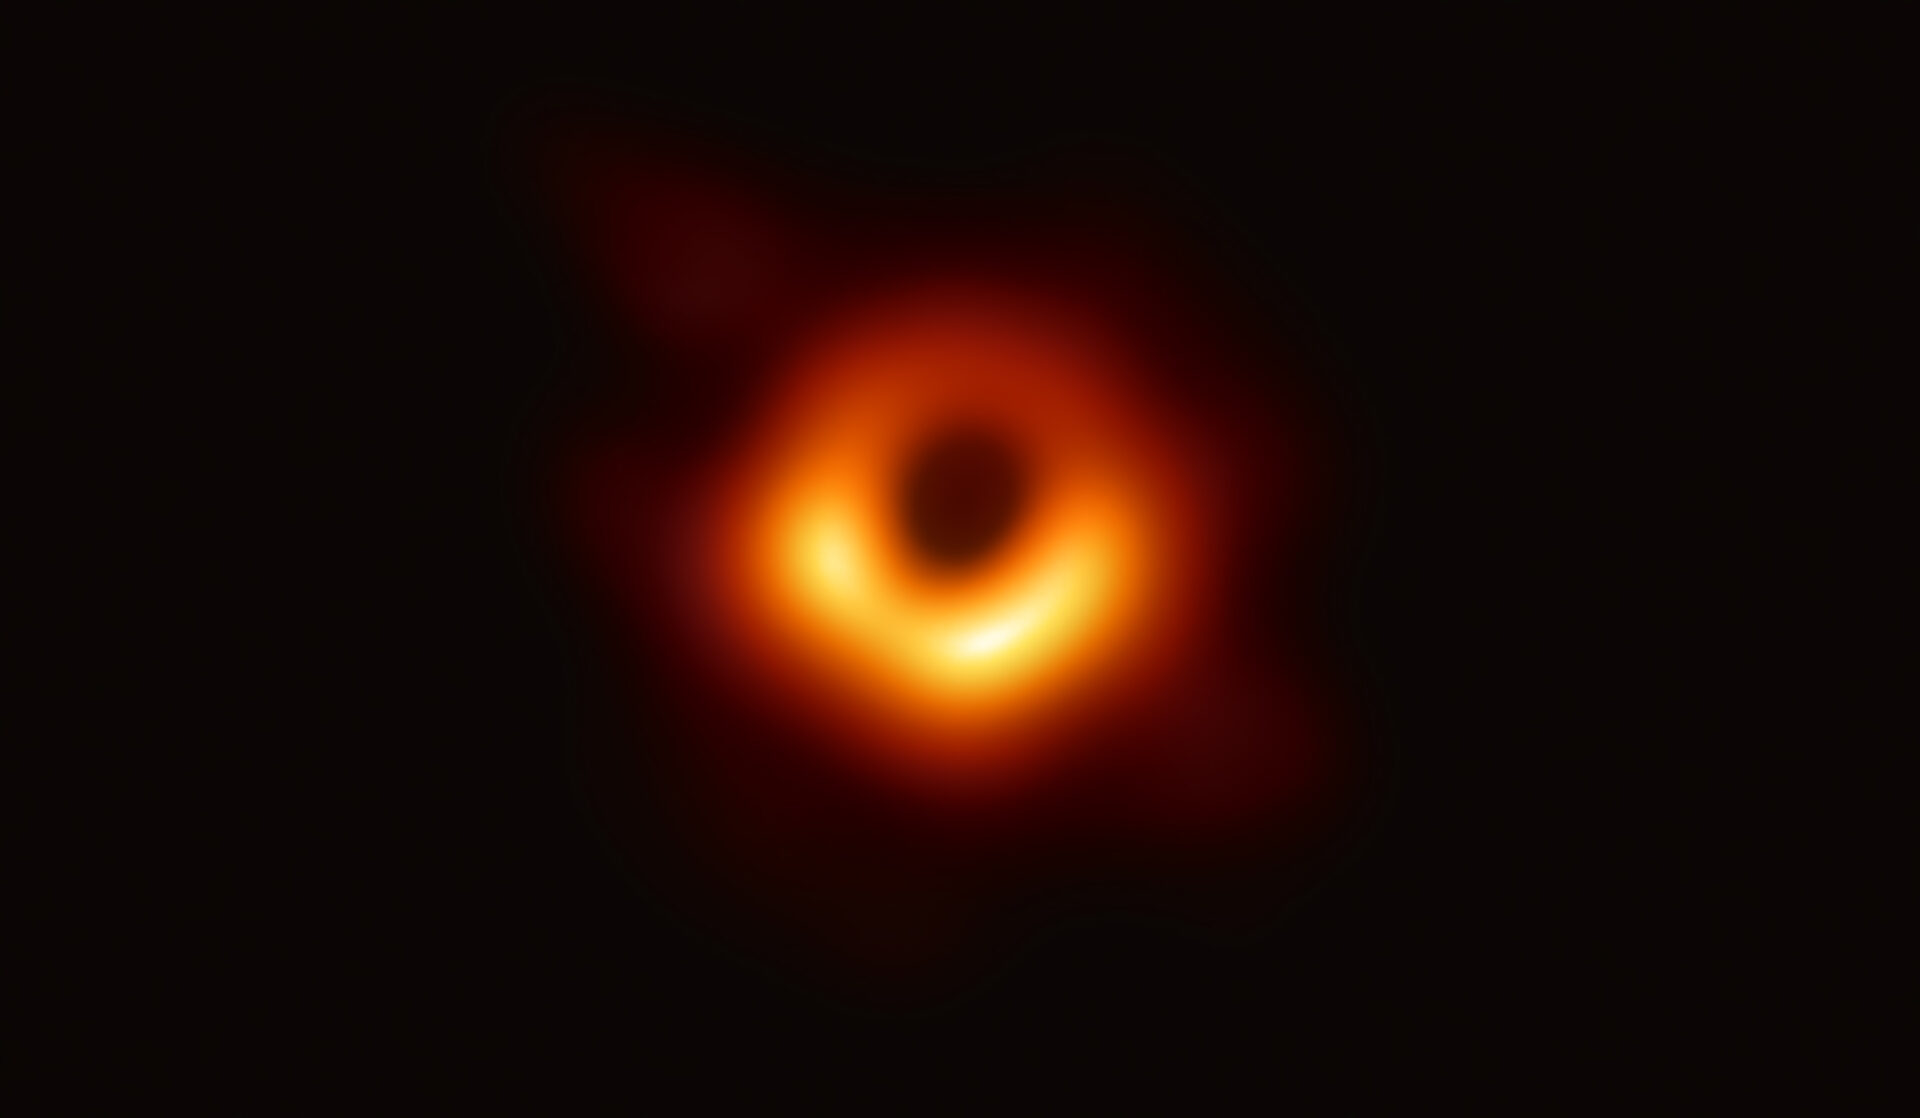 Say cheese, black hole – you’re on camera!